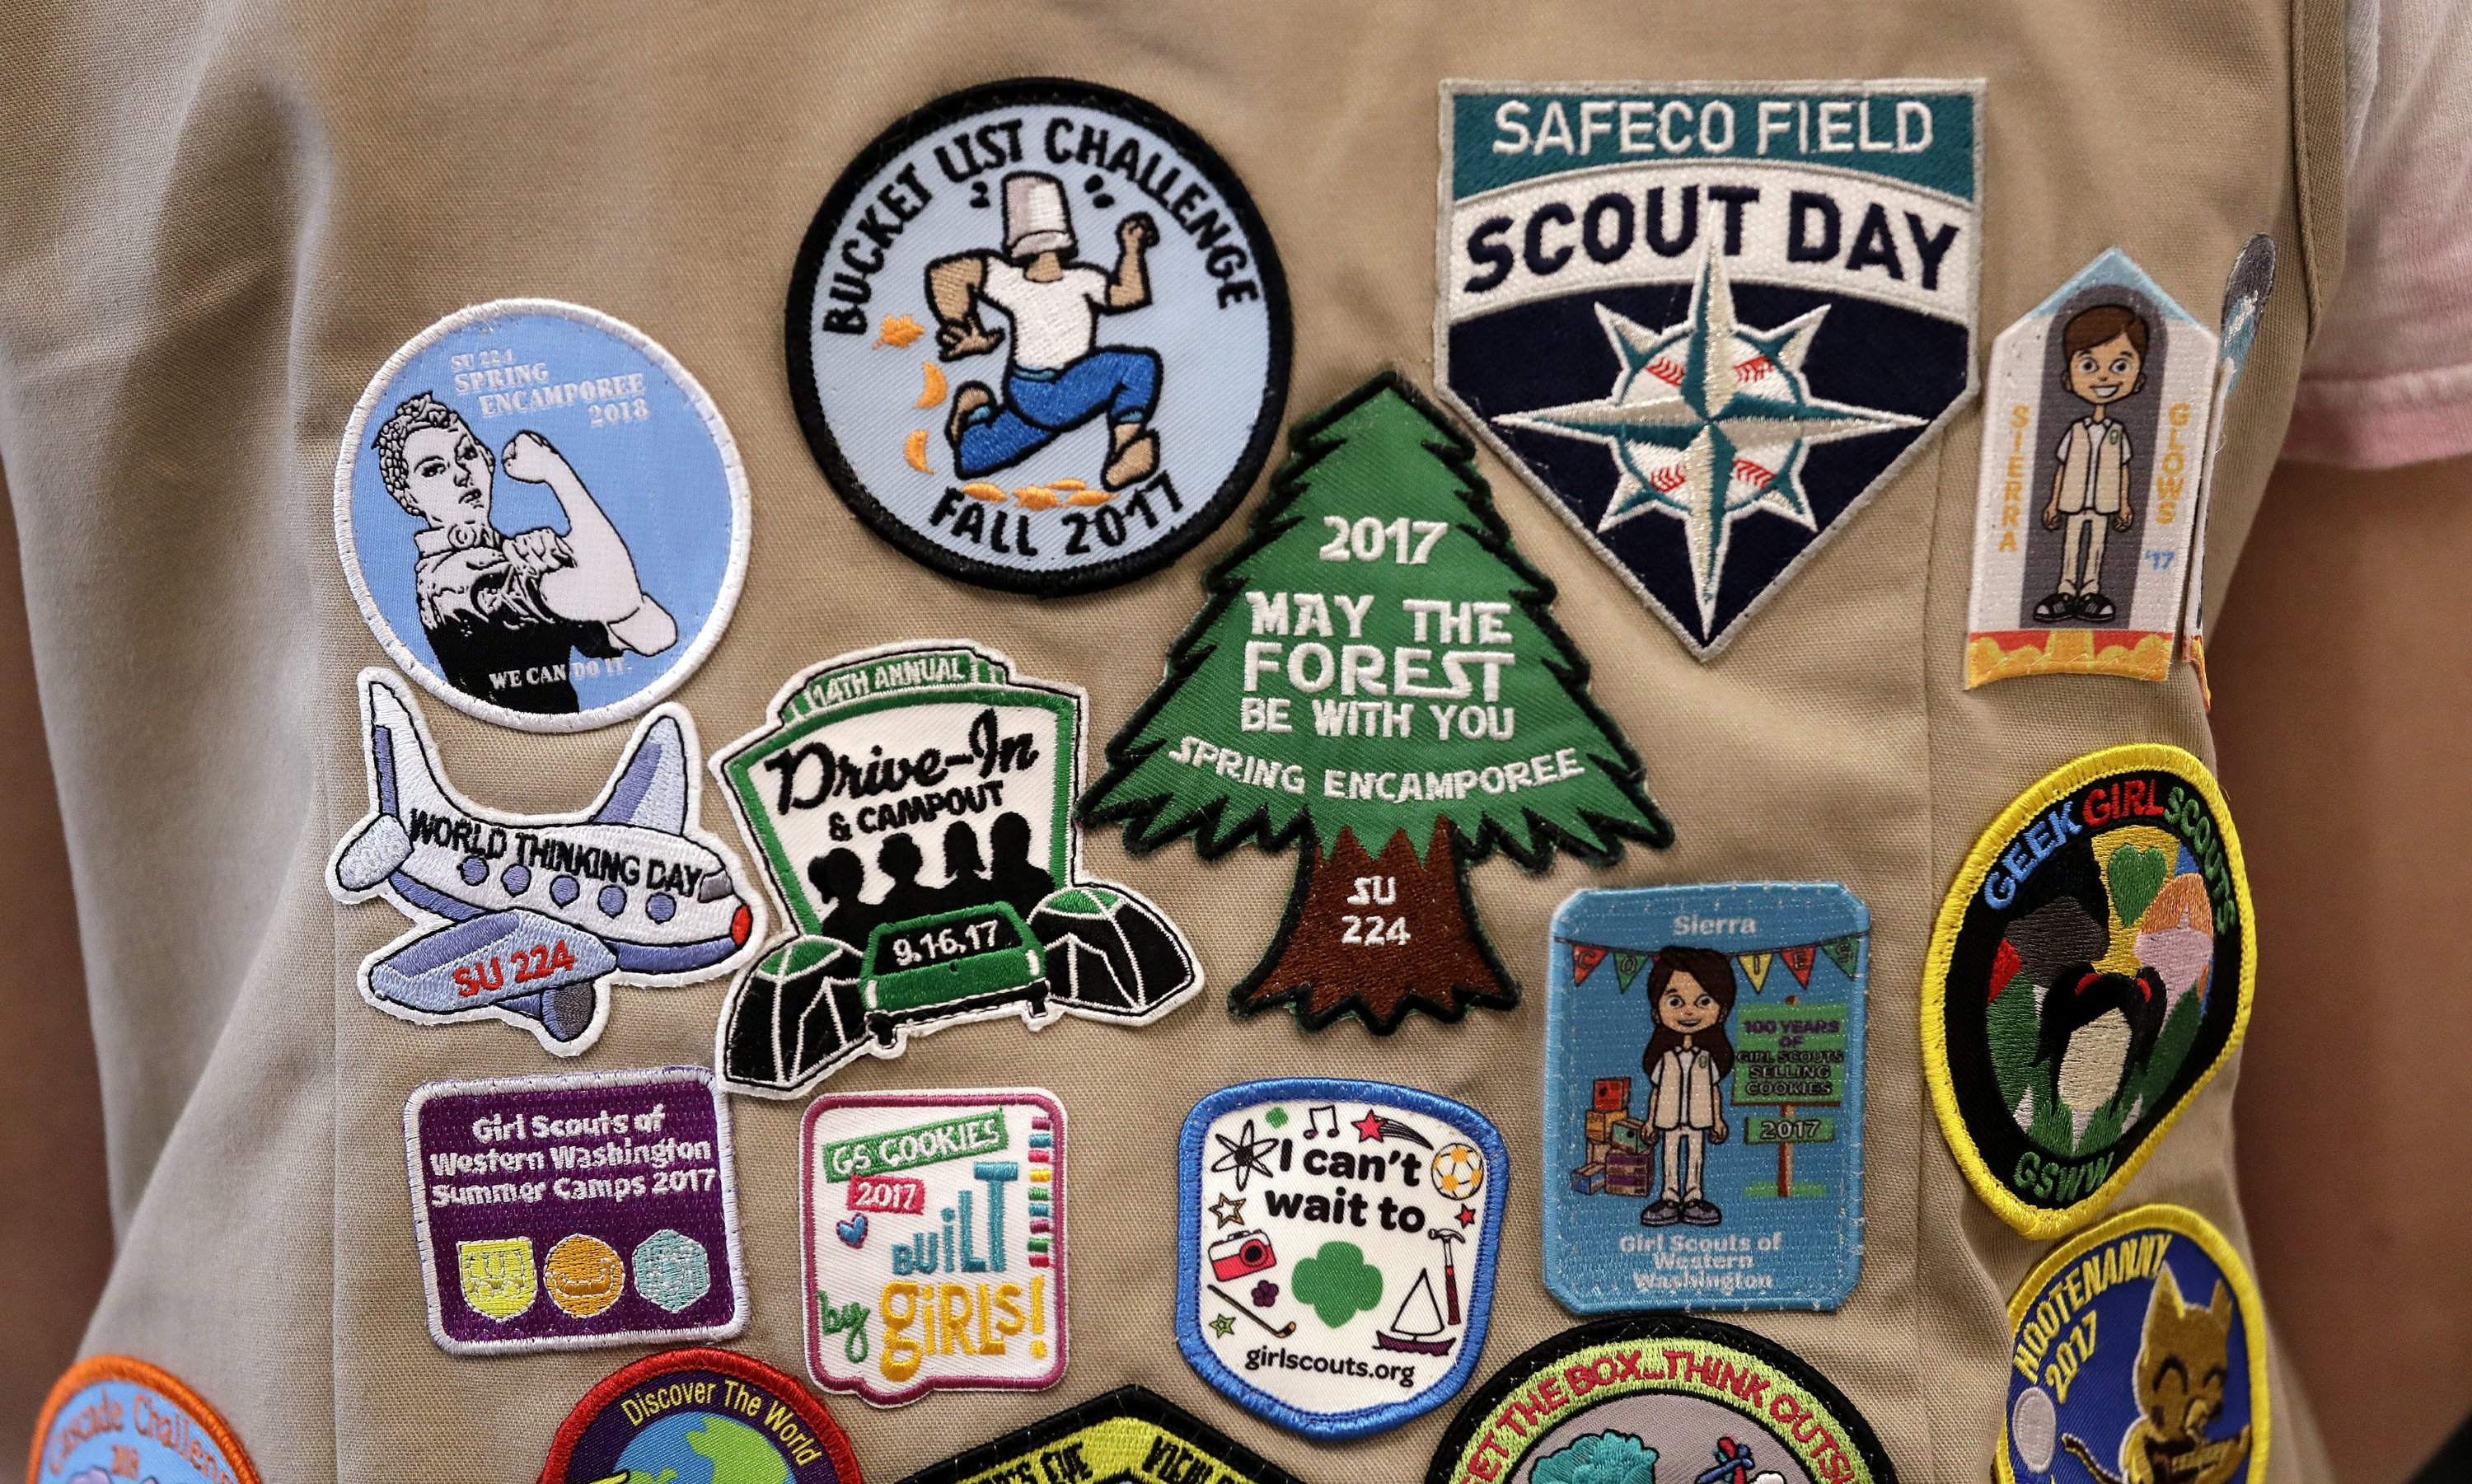 Girl Scouts Scold Scouts in Growing Recruitment War